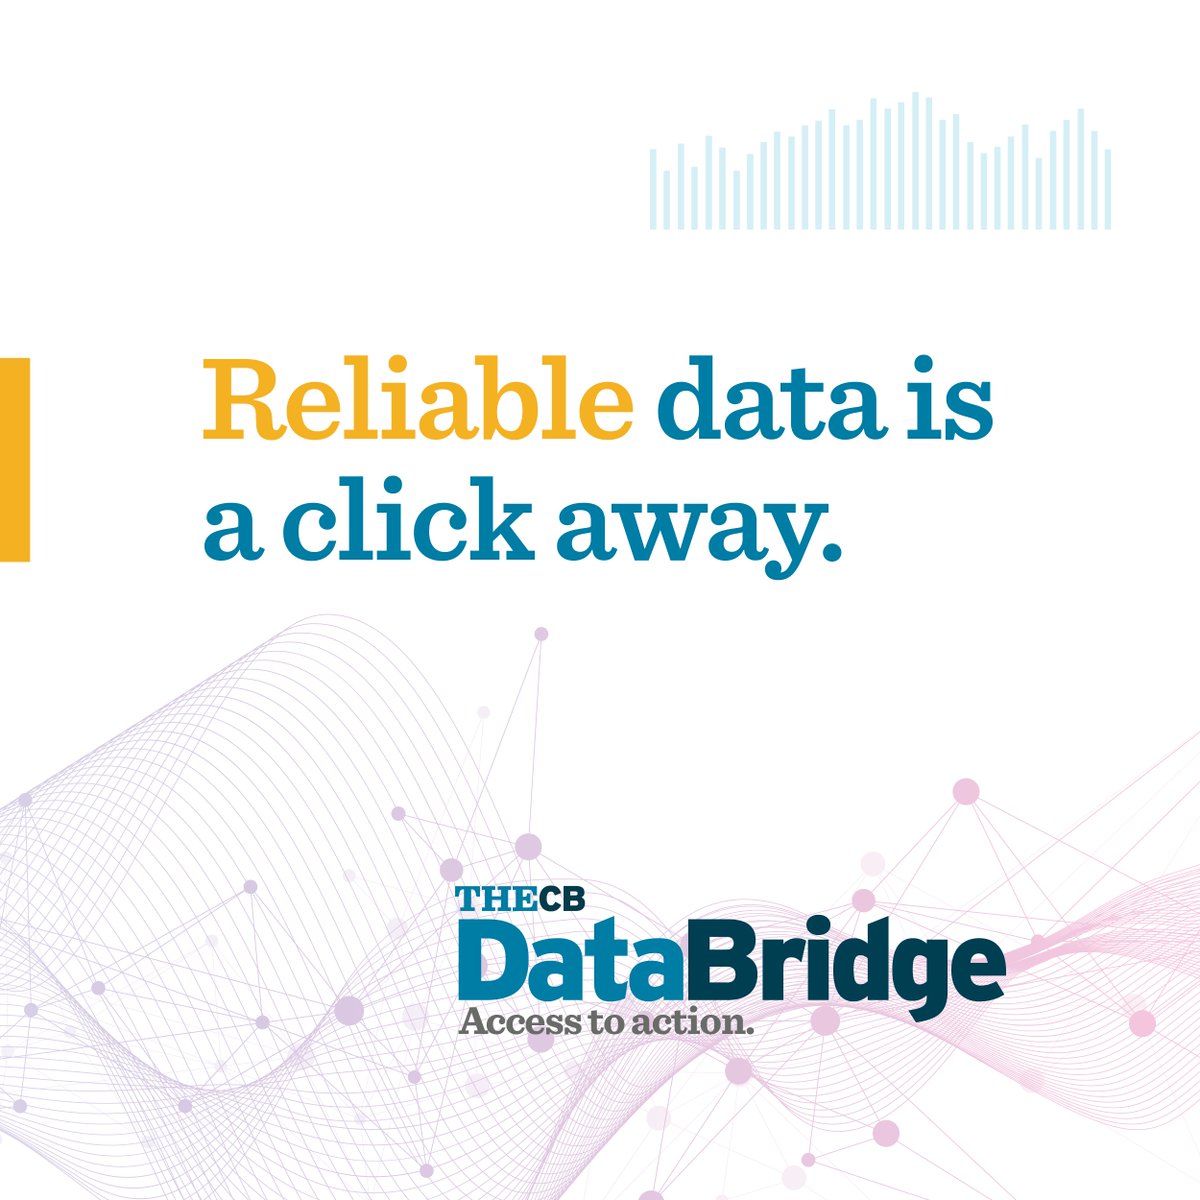 DataBridge is the state's resource for higher education data and reports. Access interactive reports to inform your research today! texas.pulse.ly/tffjc3vfl4